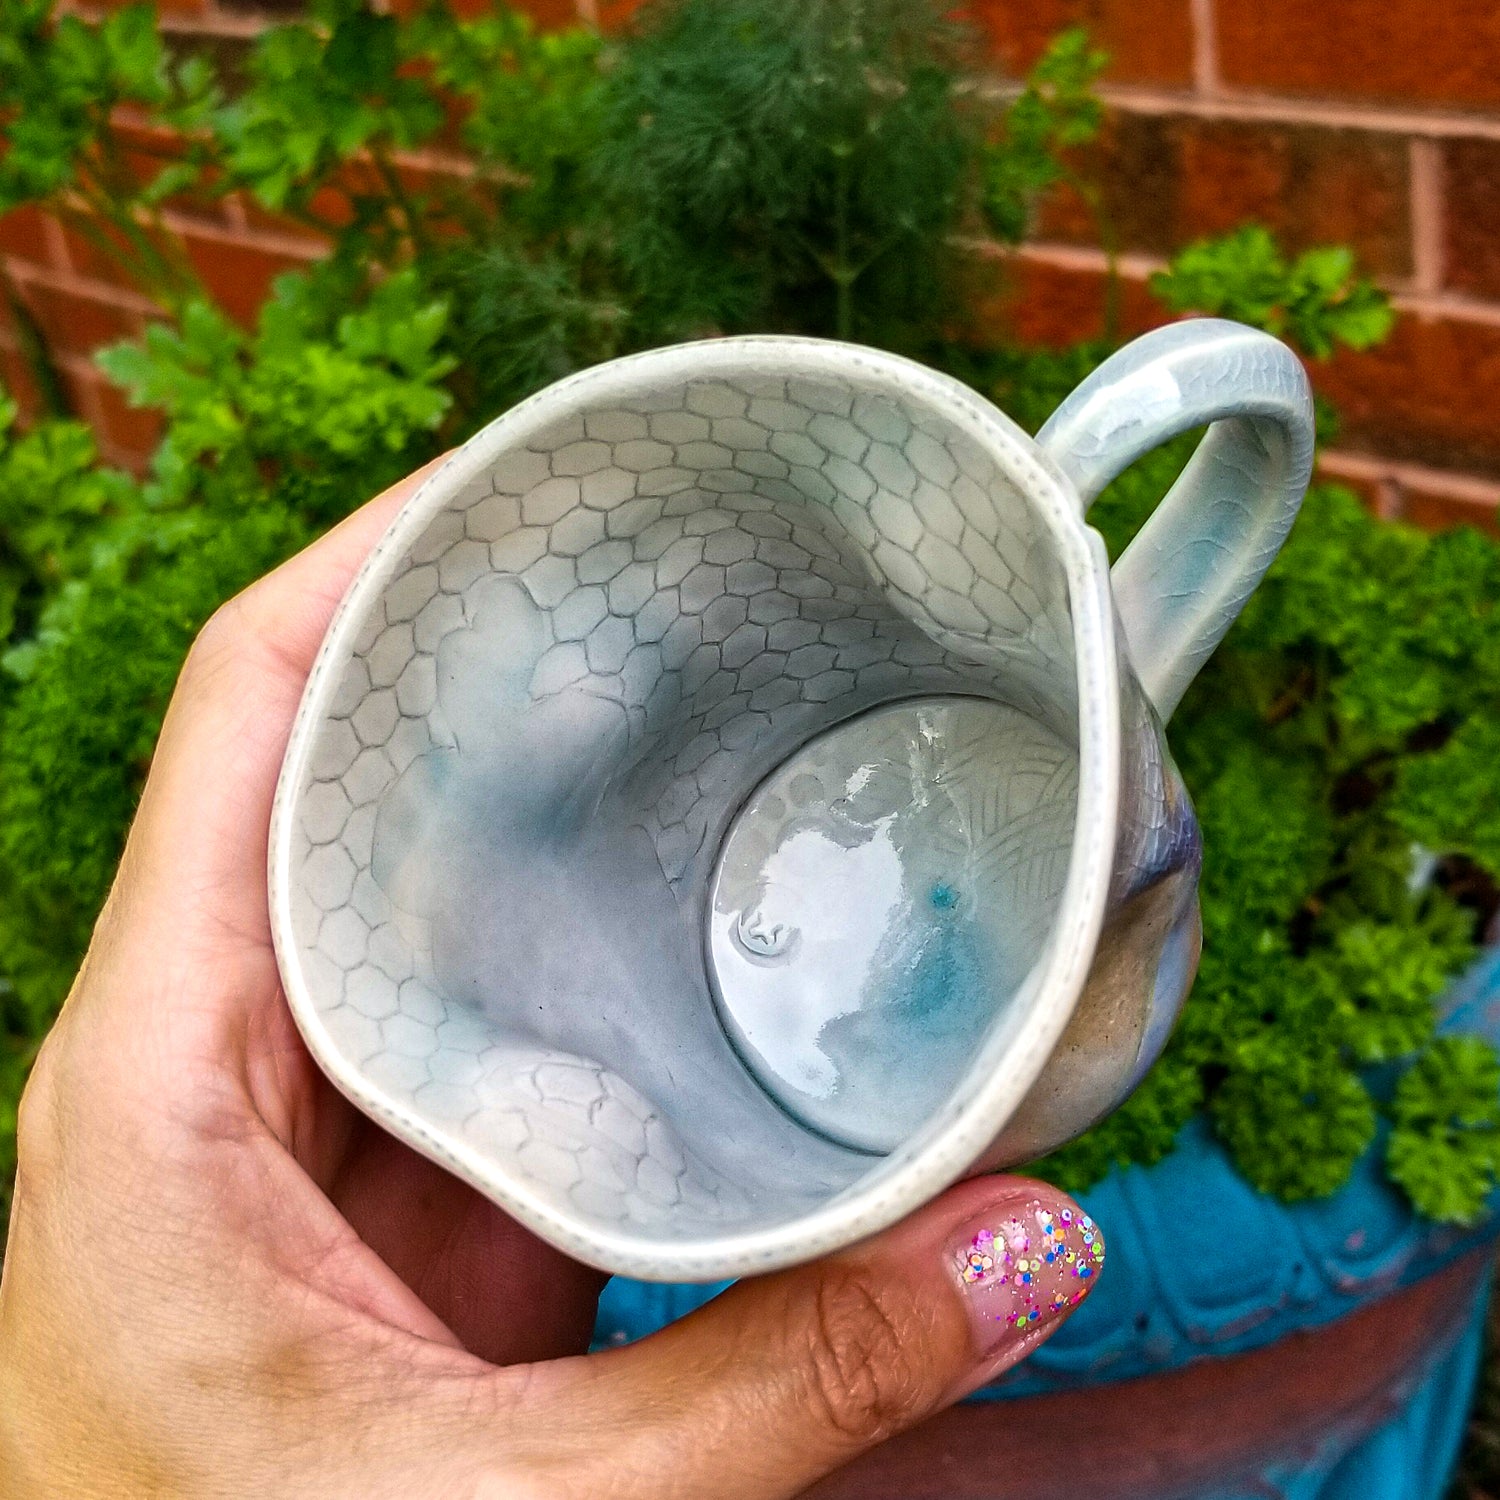 Inside detail of handmade stoneware ceramic soda fired mug blue color with pressed textures